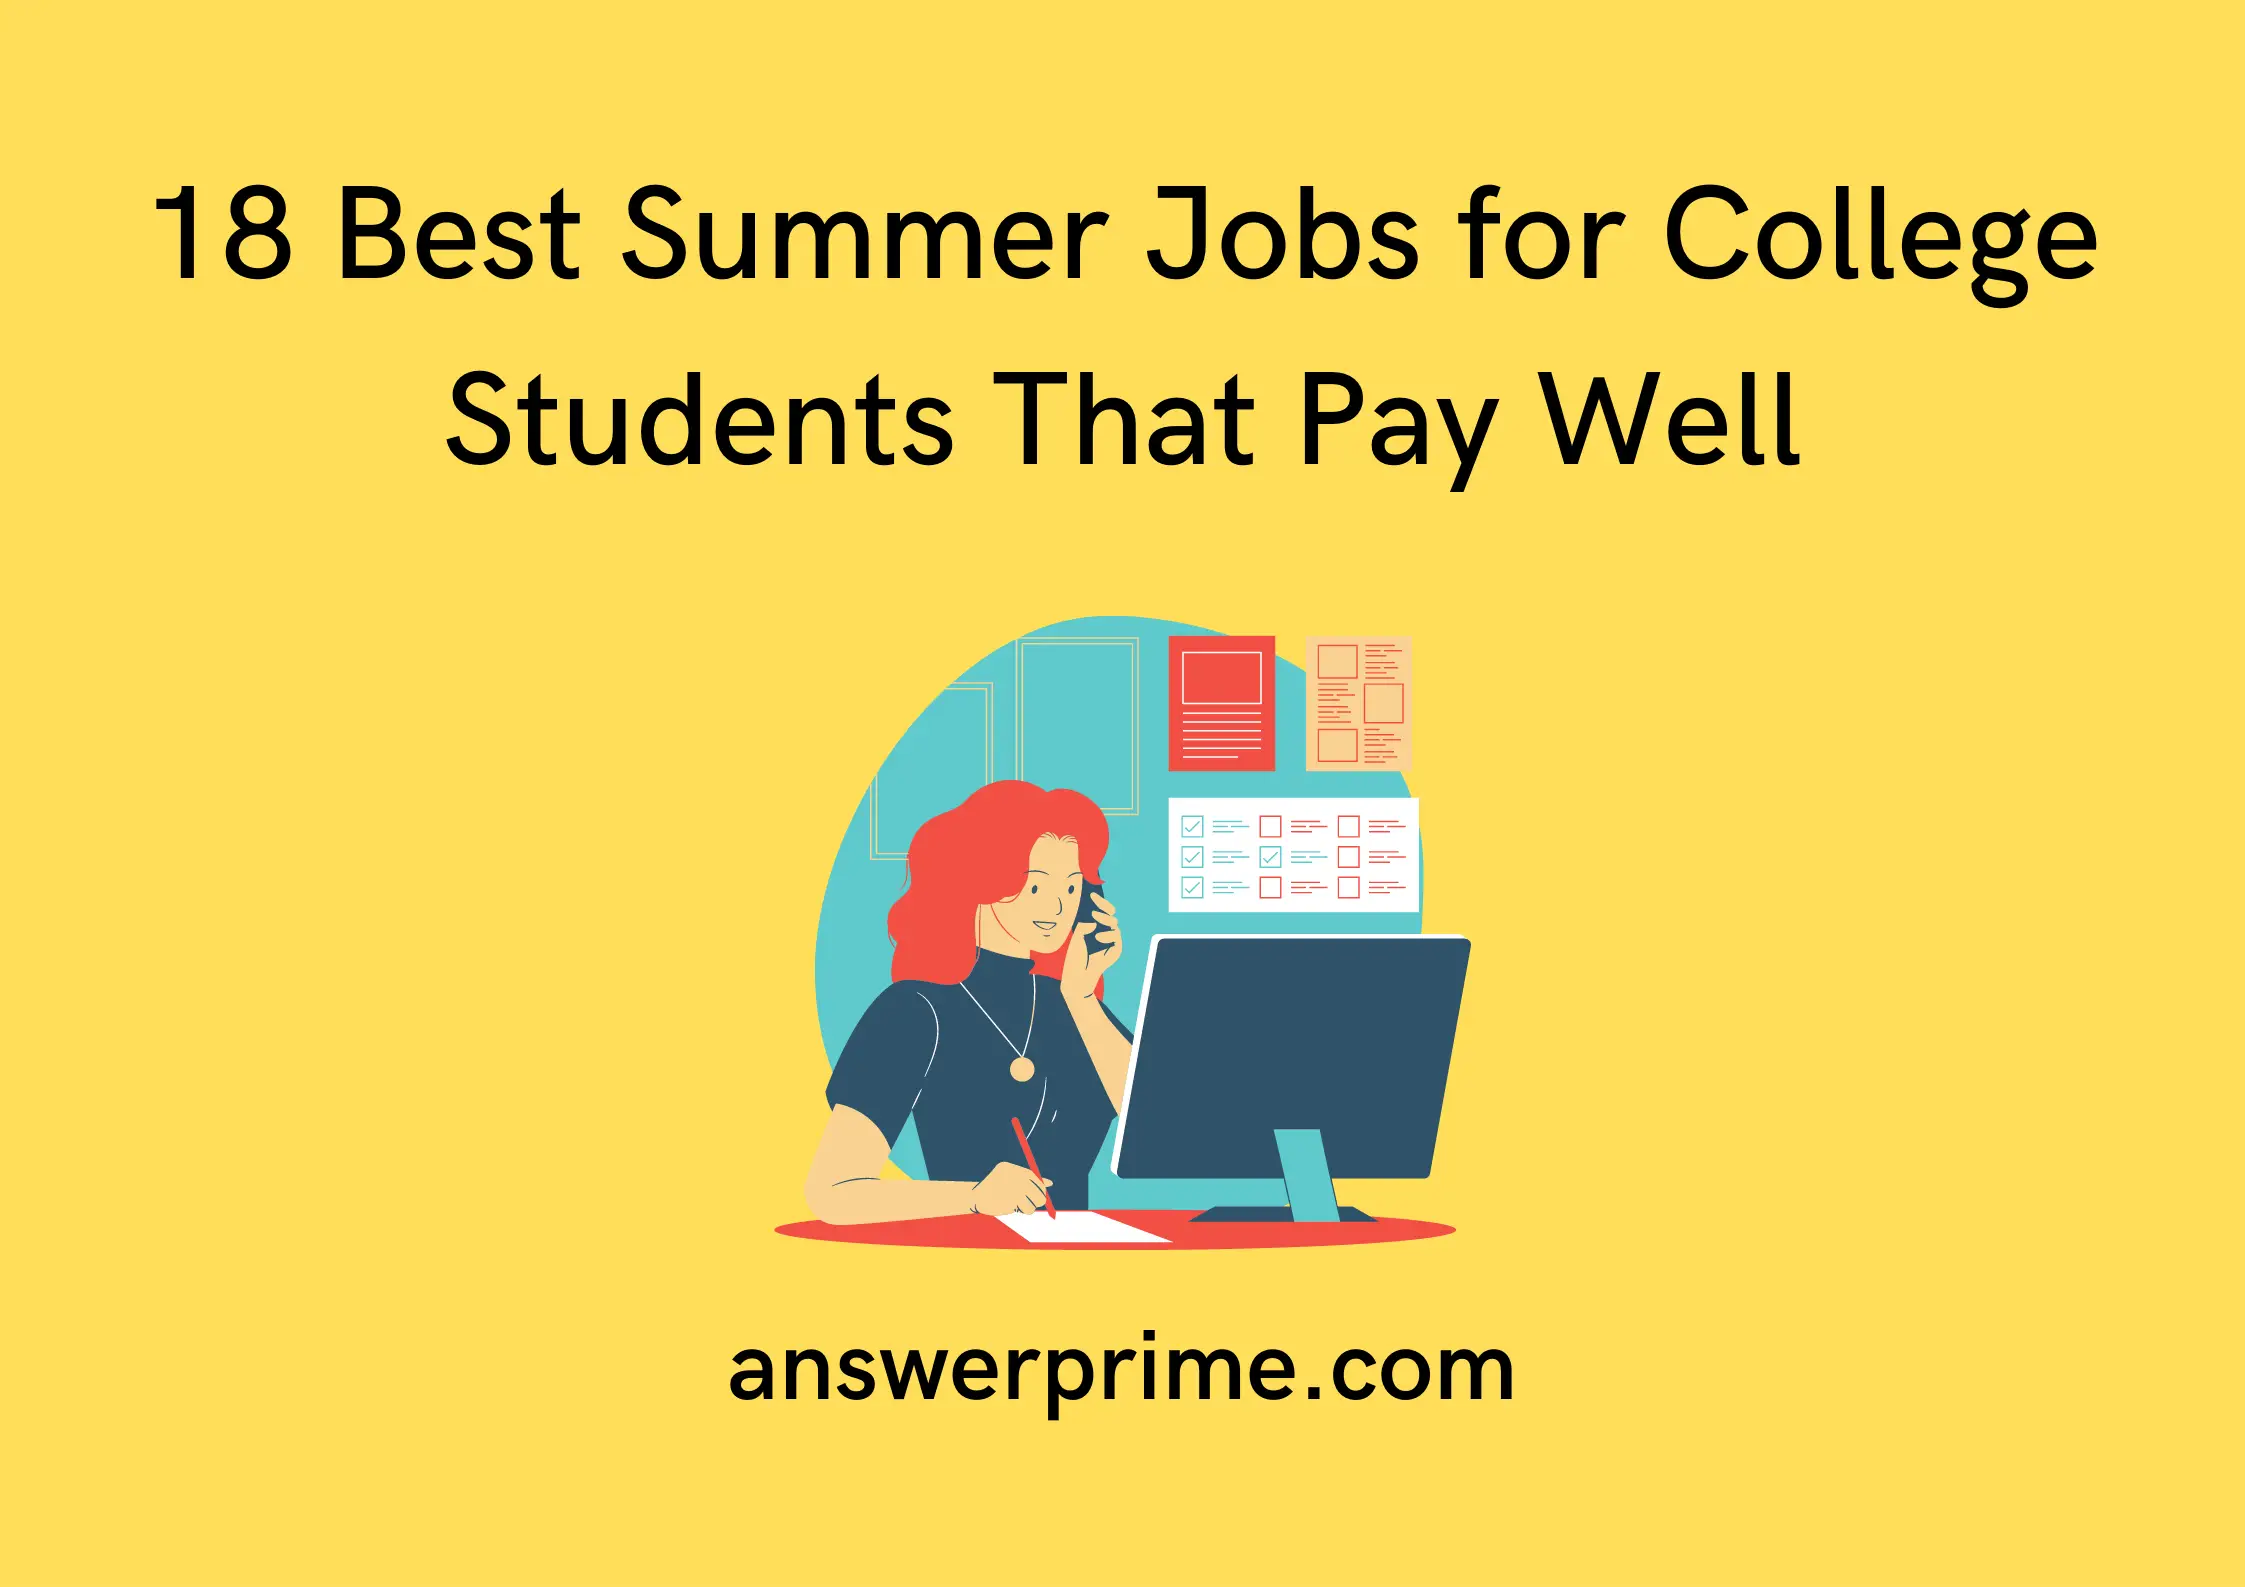 18 Best Summer Jobs for College Students that Pay well